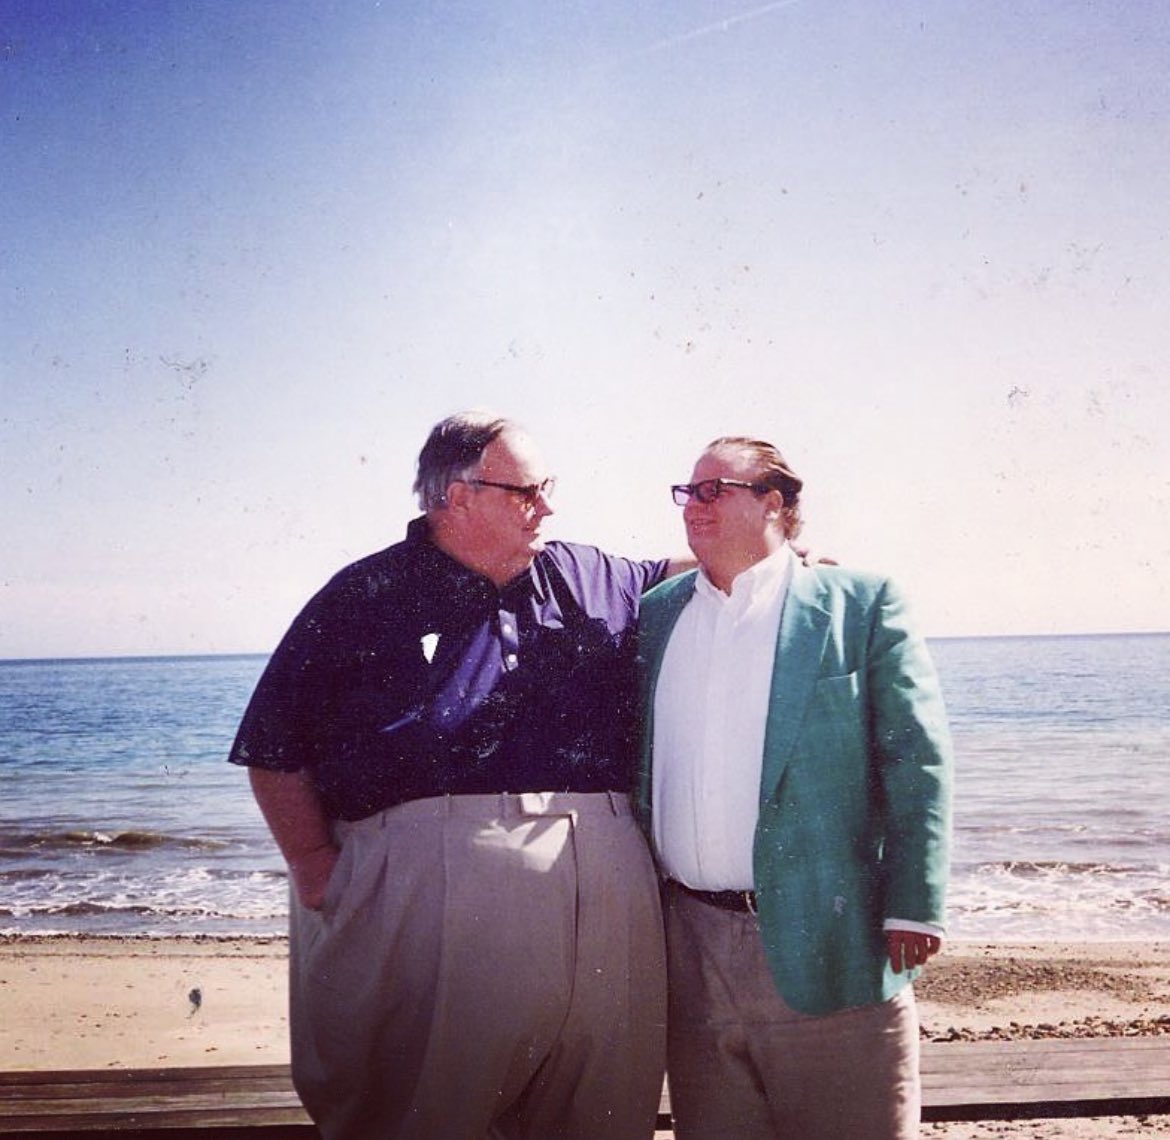 In the 1990s, Chris Farley and his father spent time together at the beach on Lake Michigan. According to Chris's older brother Tom's written account, their father epitomized unwavering affection when it came to Chris. However, assisting Chris in his struggles proved to be a